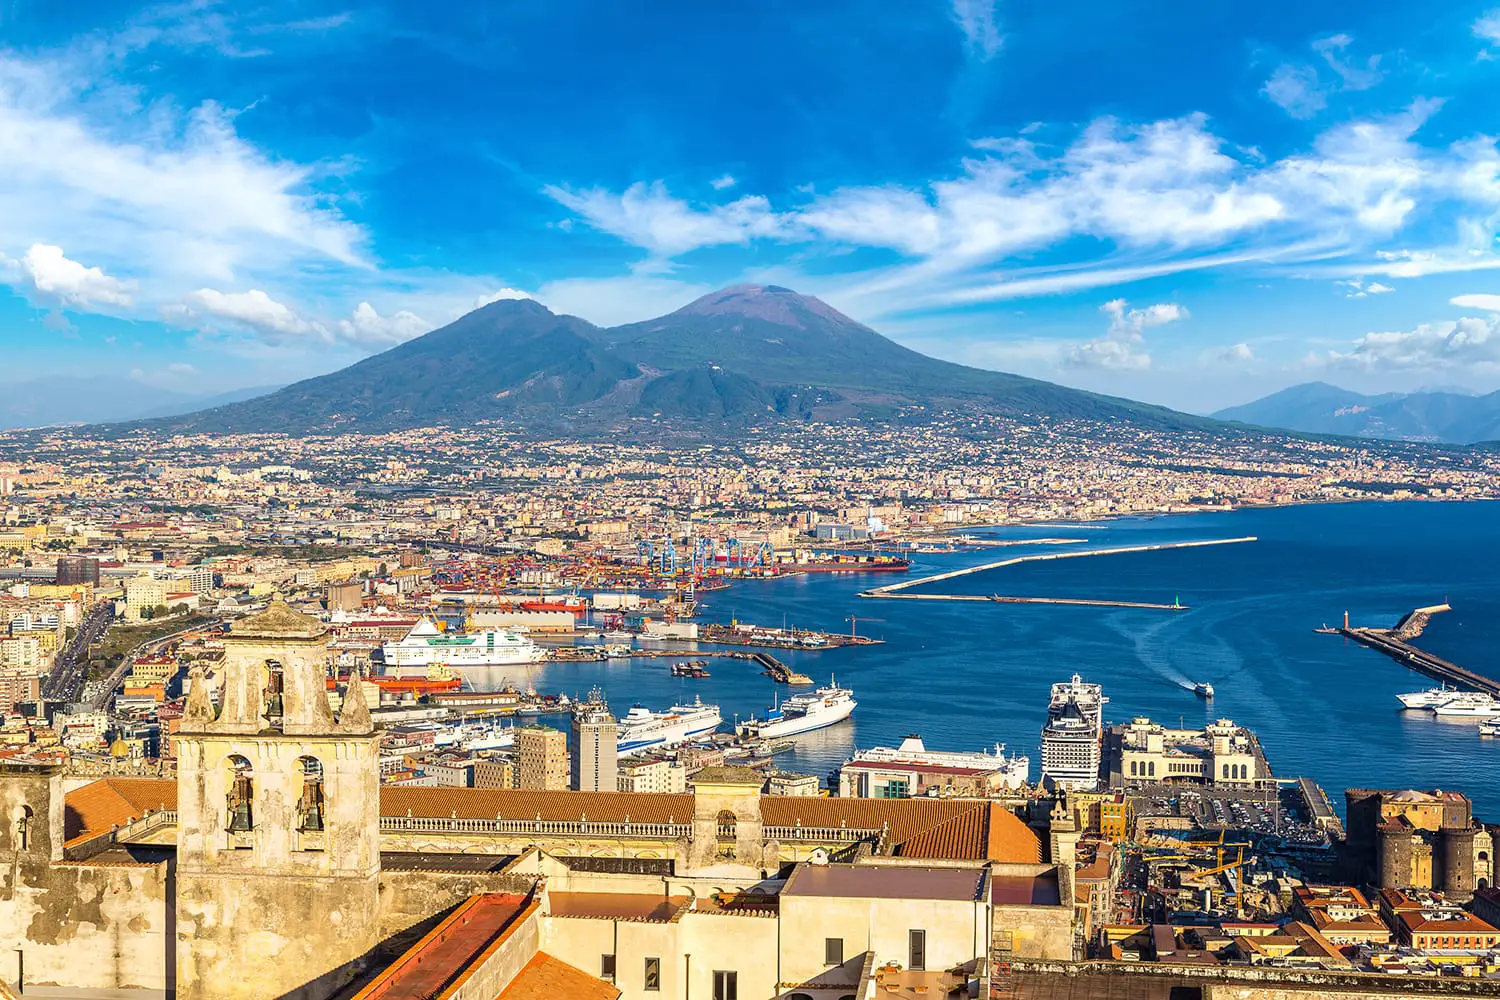 Napoli (Naples) and mount Vesuvius in the background at sunset in a summer day, Italy